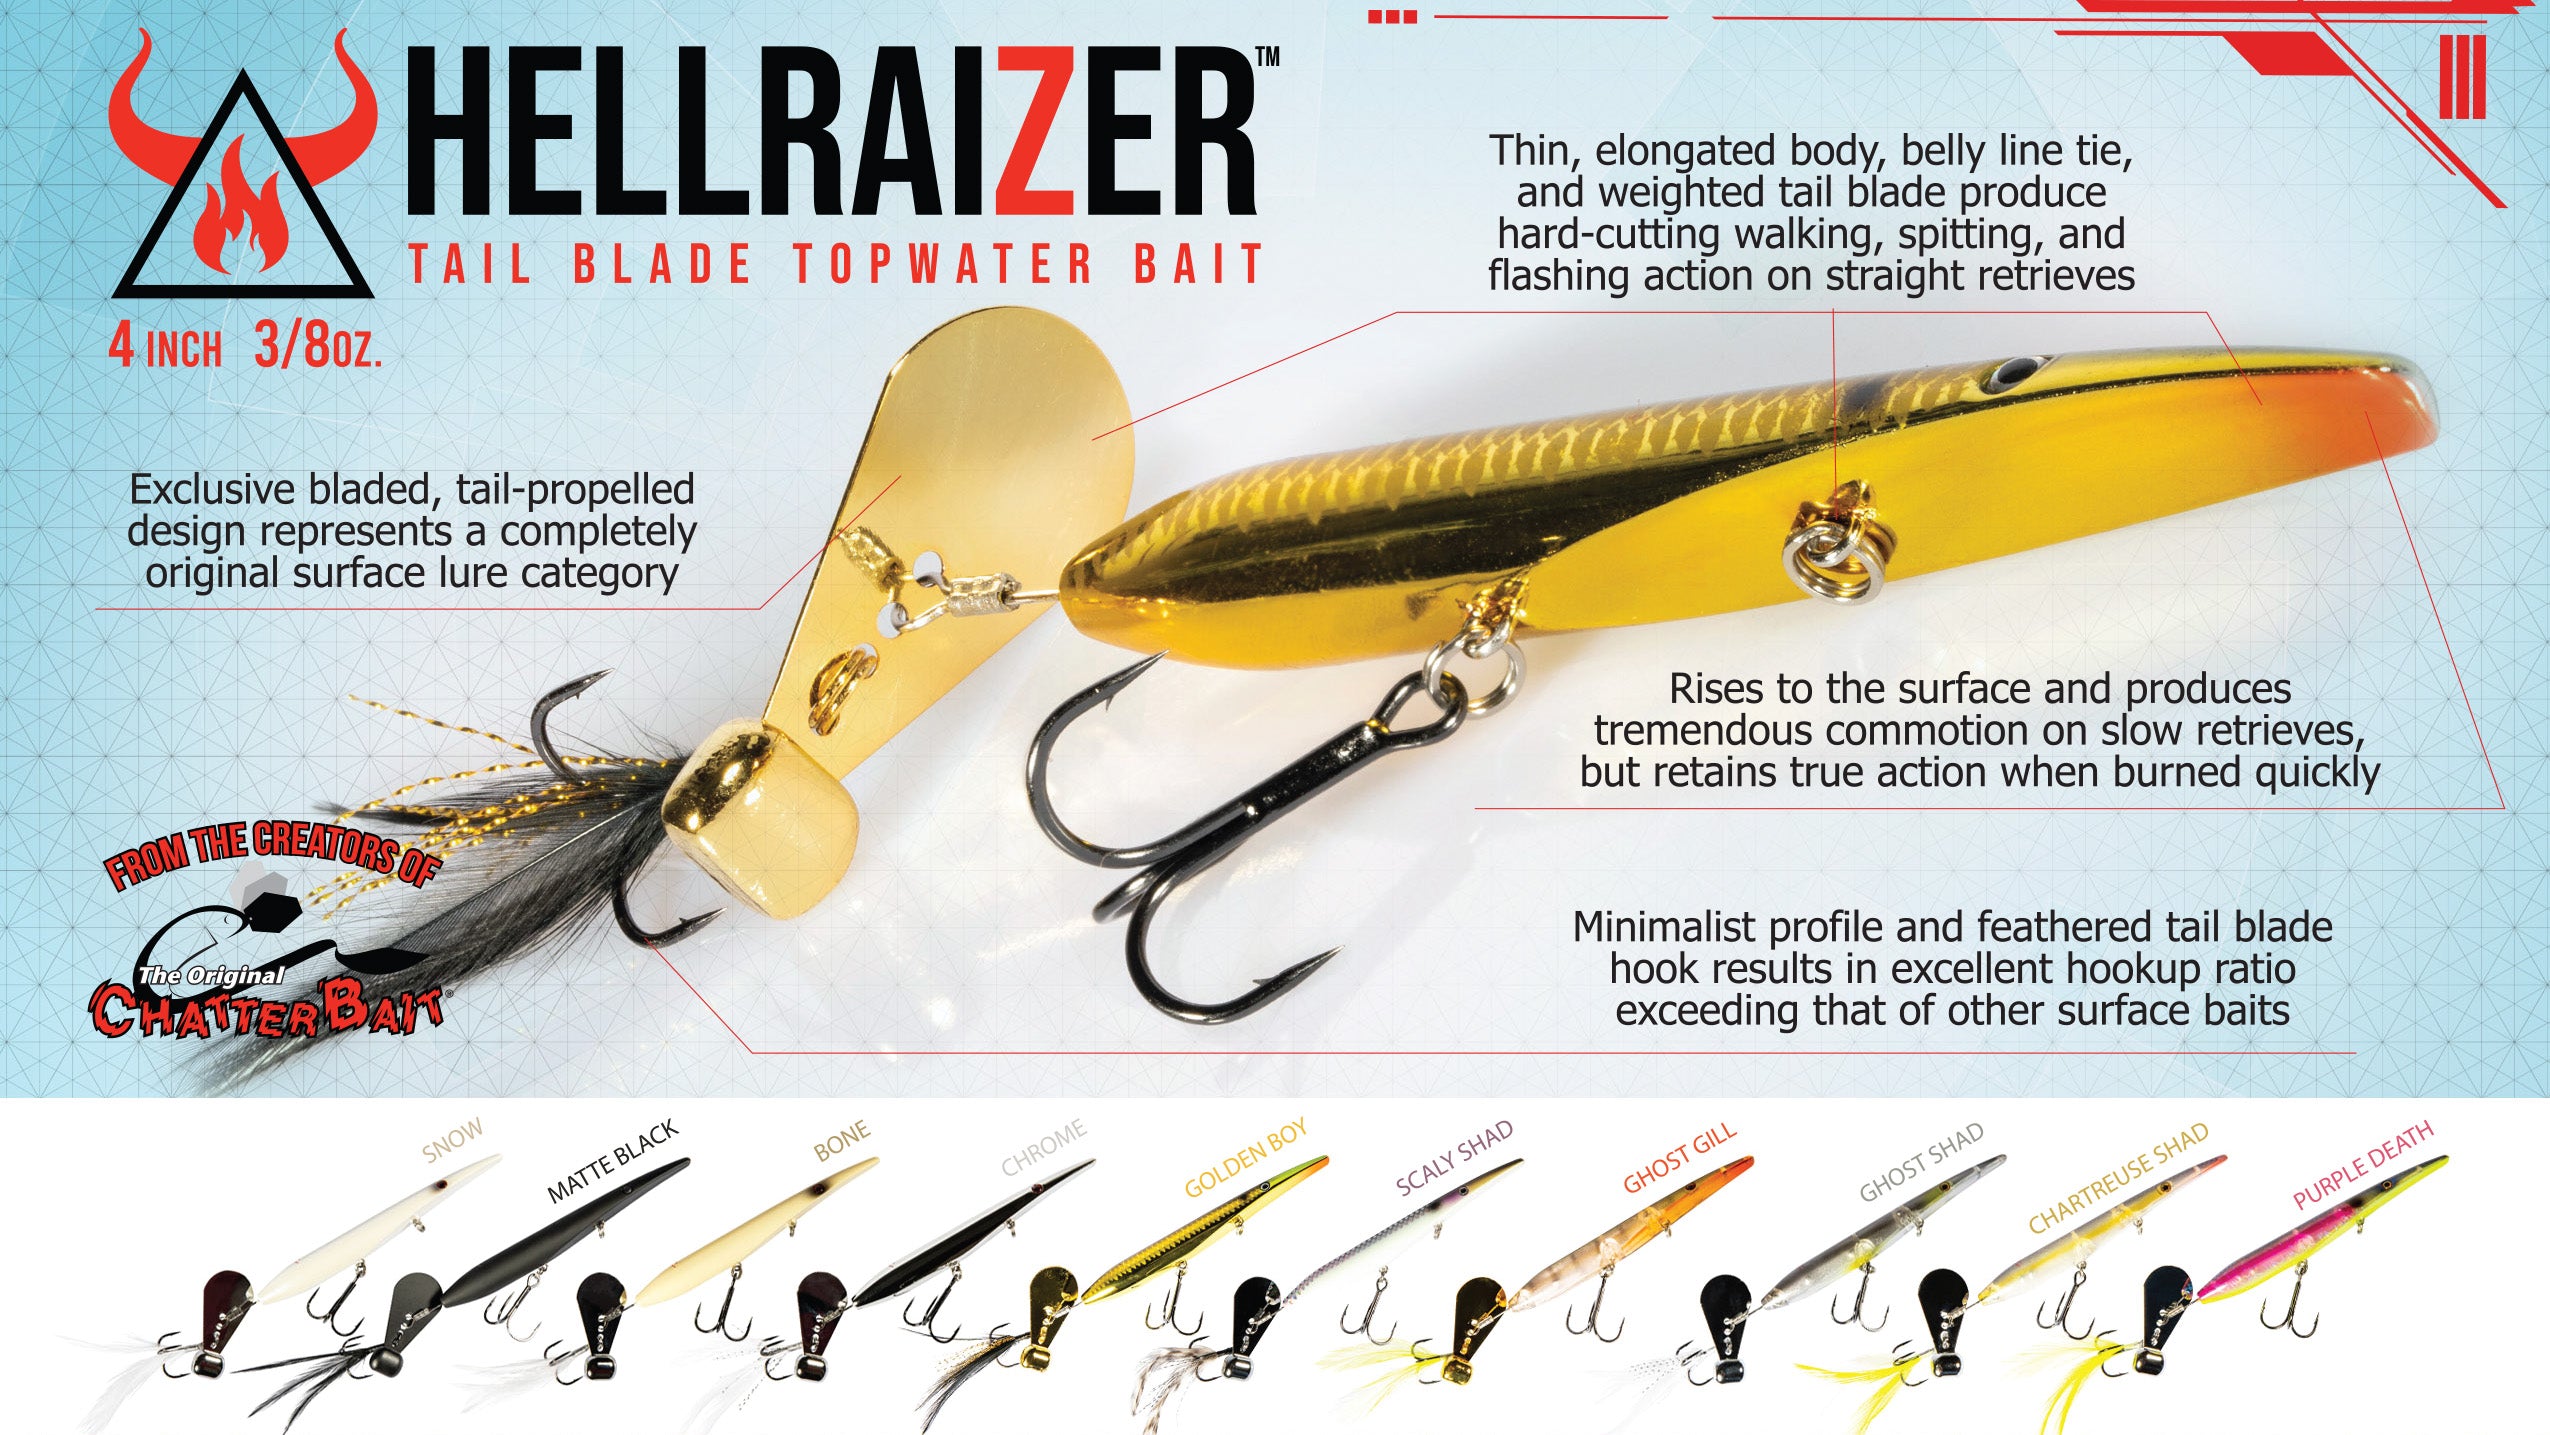 Product image showing all colors made for the HellraiZer